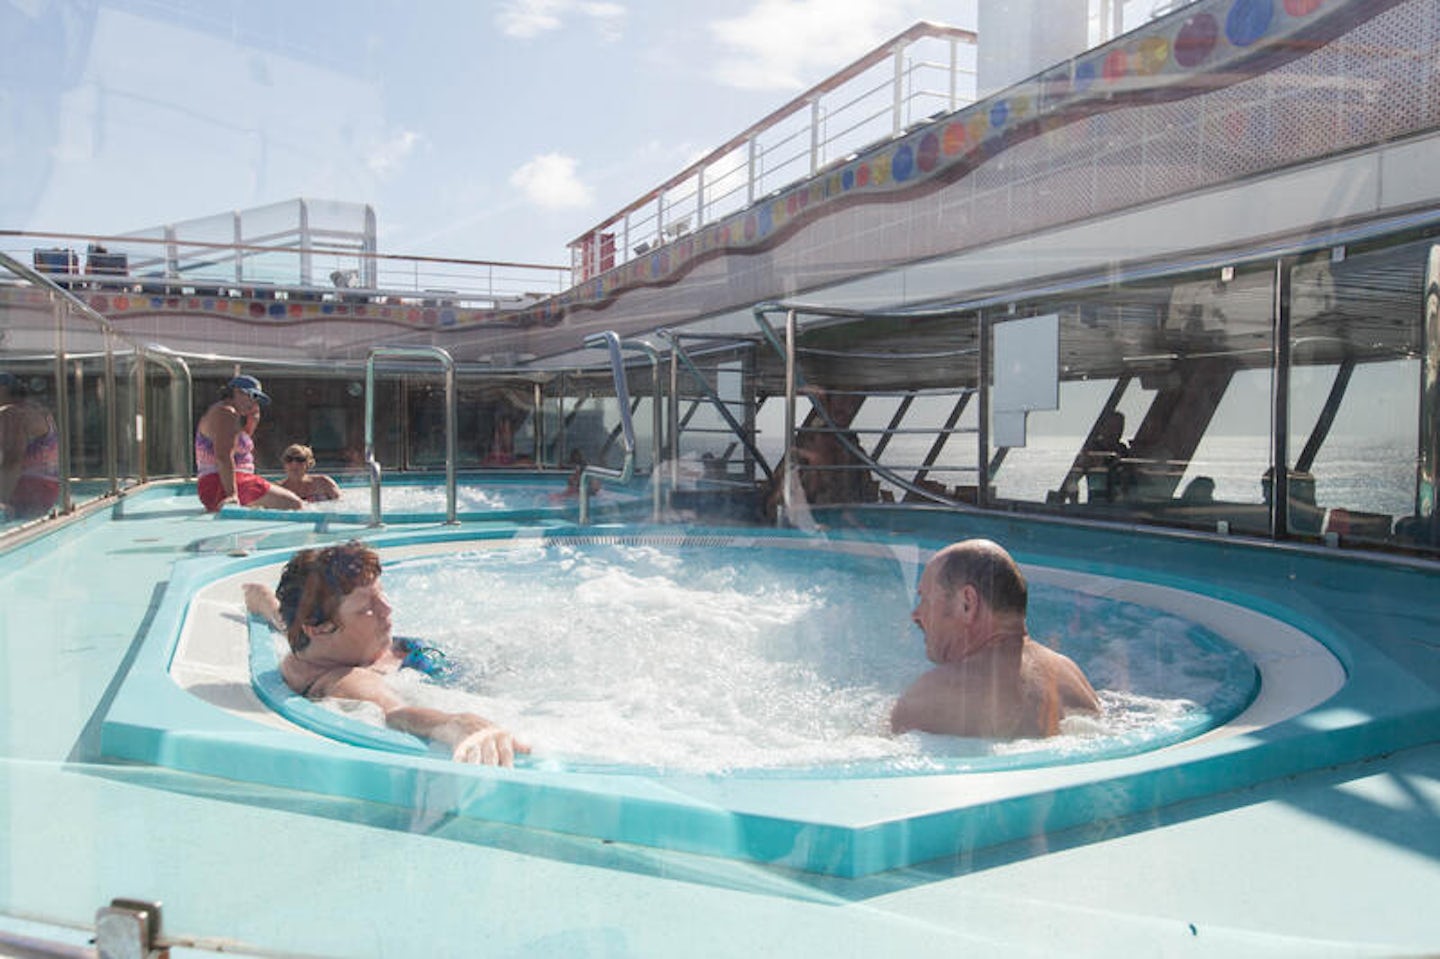 The Pool on Carnival Conquest